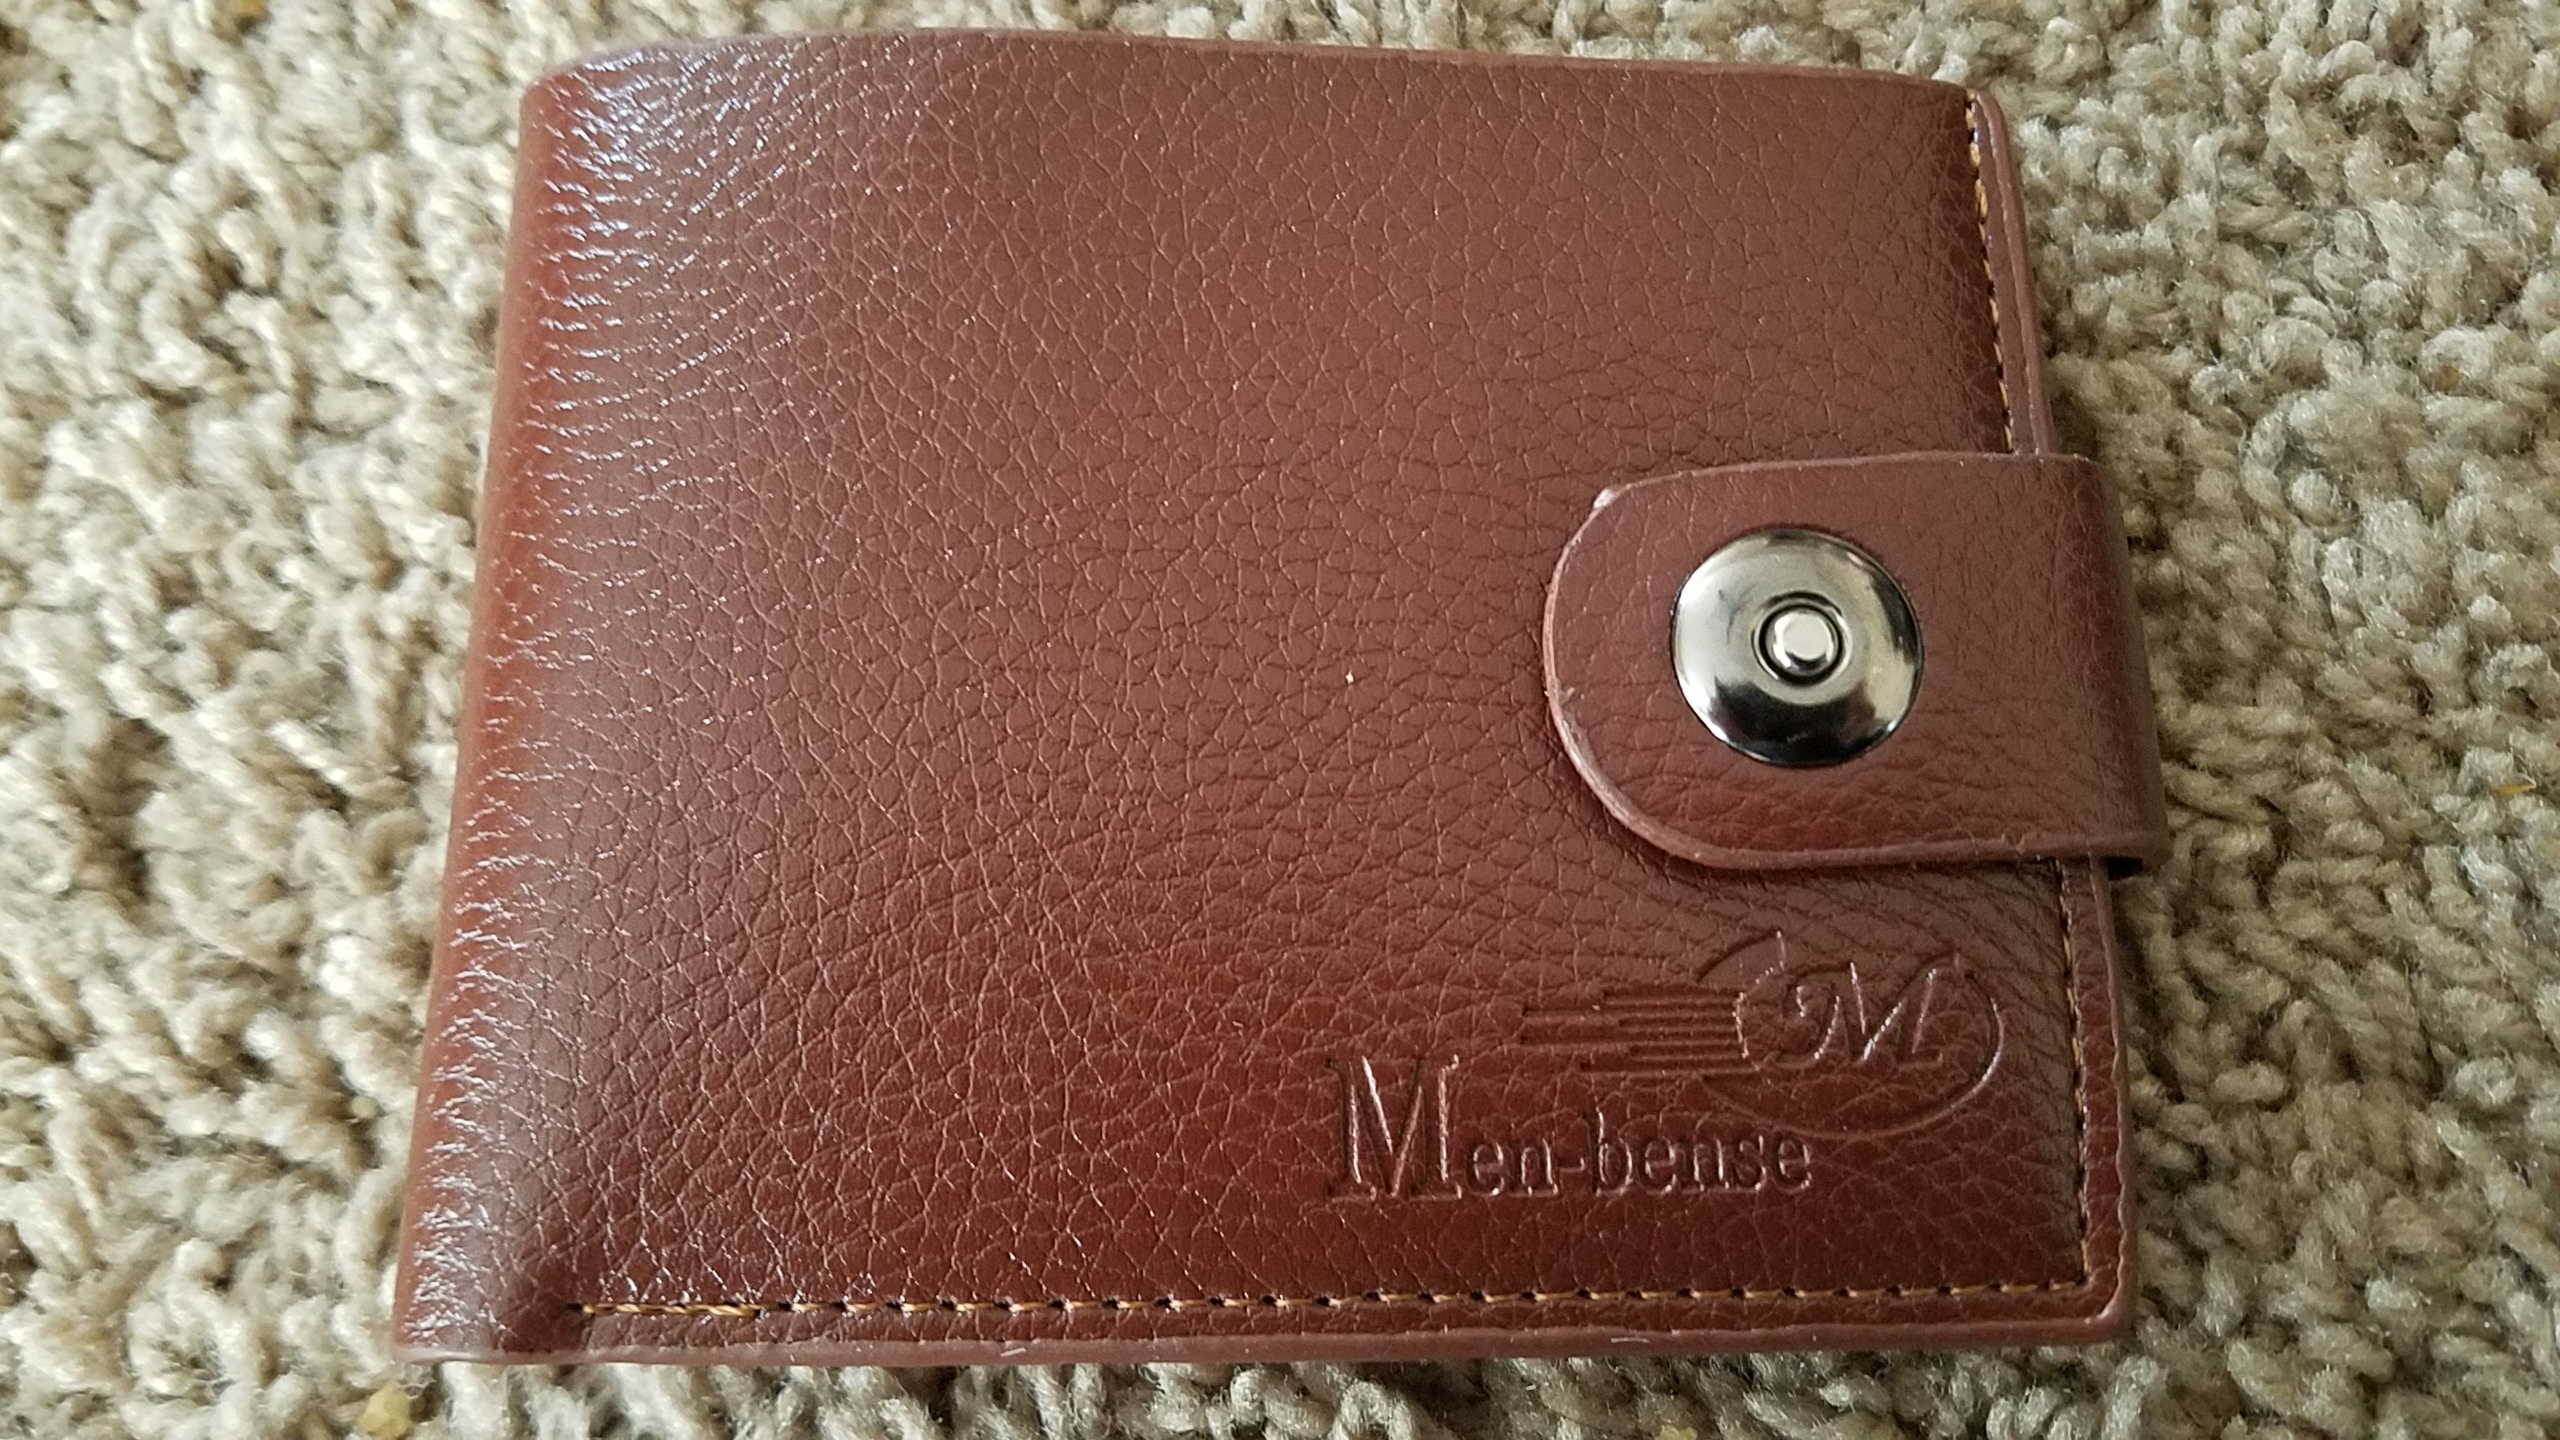 Excellent wallet, but a little pricey...